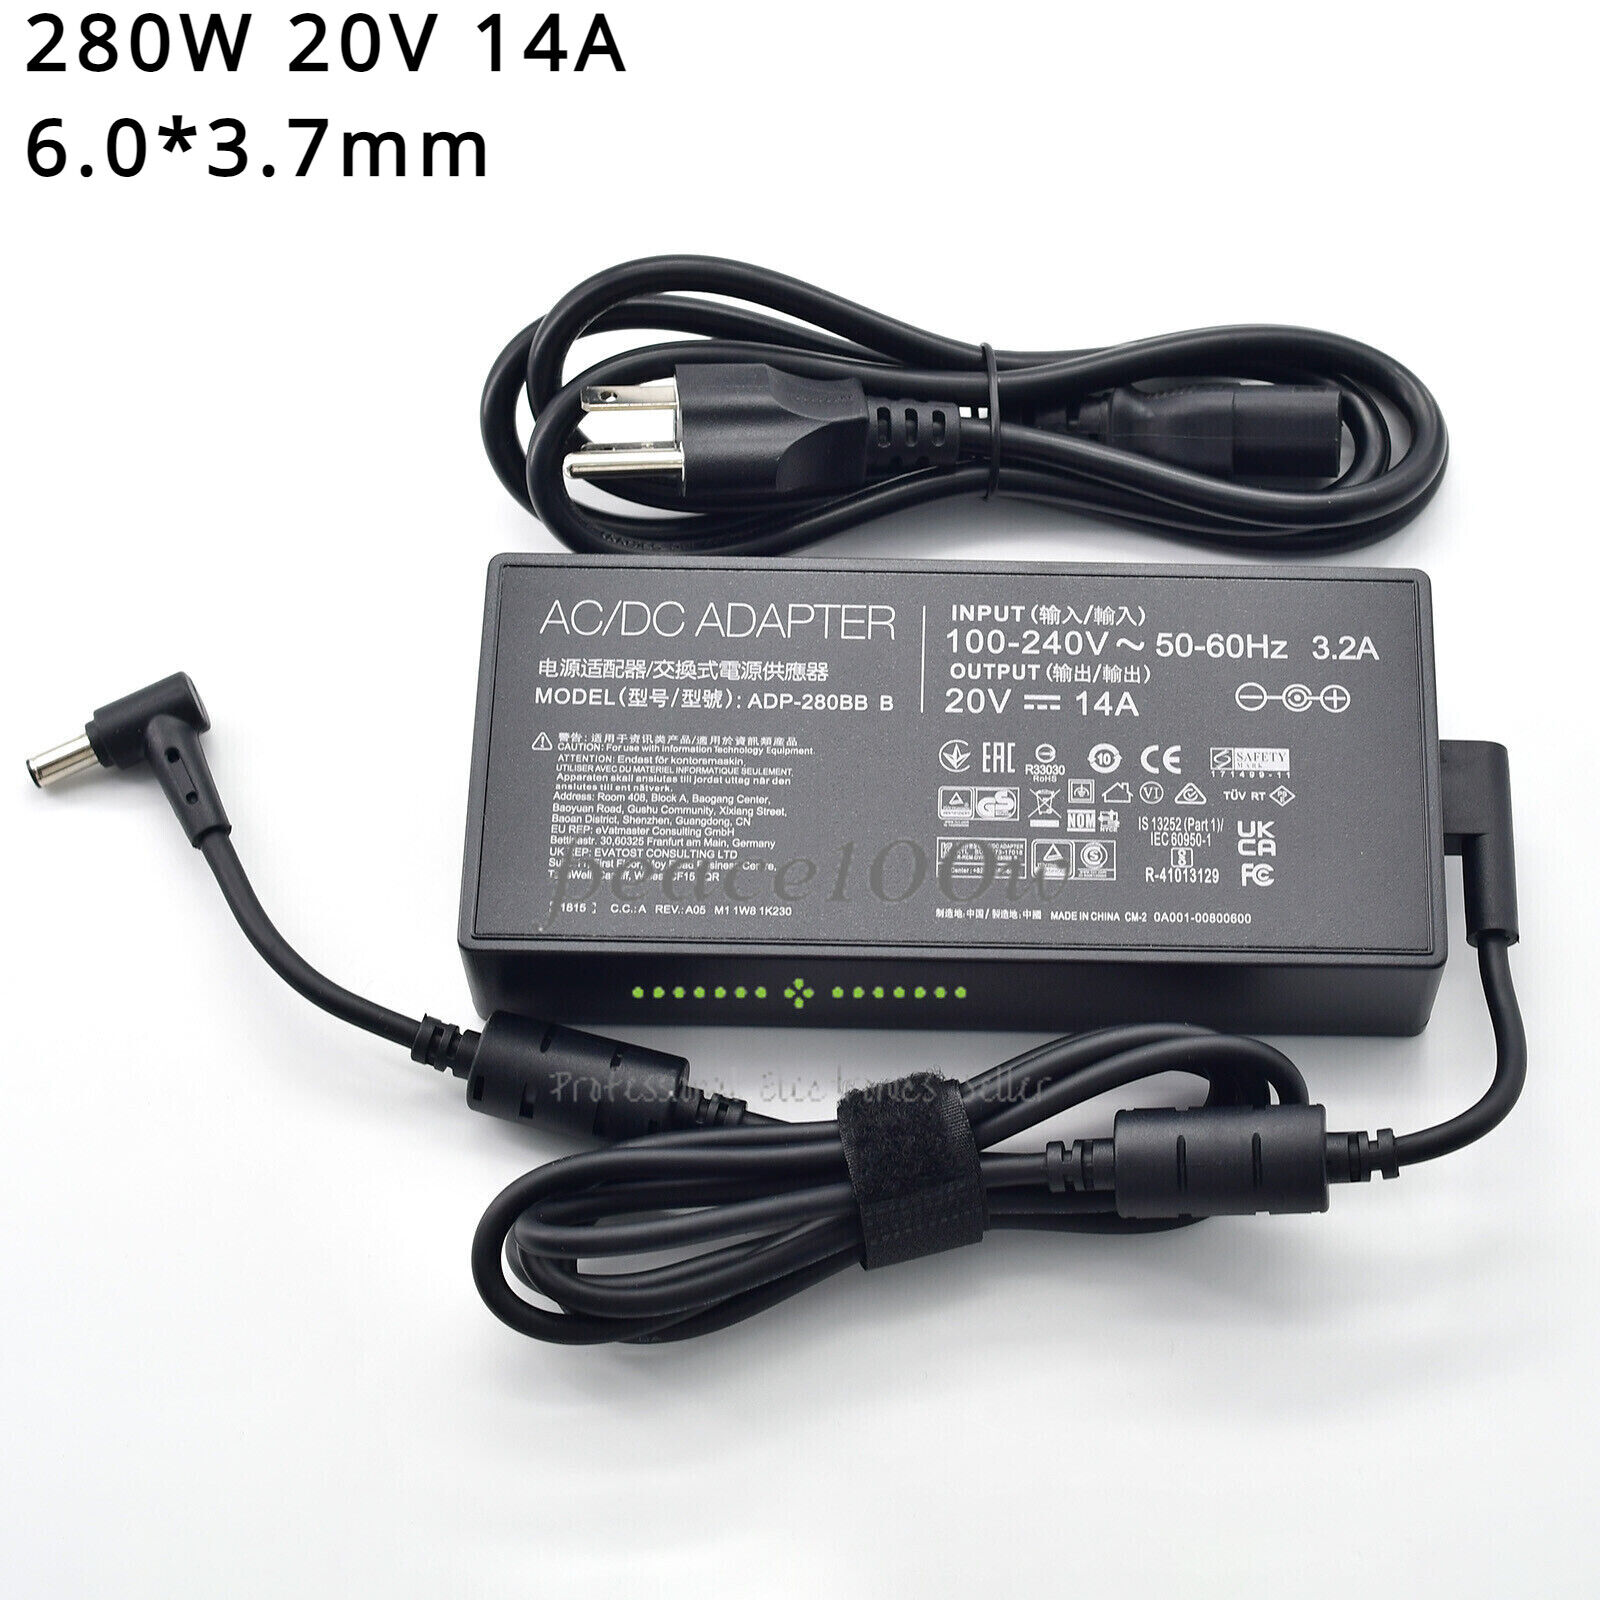 280W 20V 14A ADP-280EB B AC Adapter Charger for ASUS ROG Strix G614JV 6.0*3.7mm